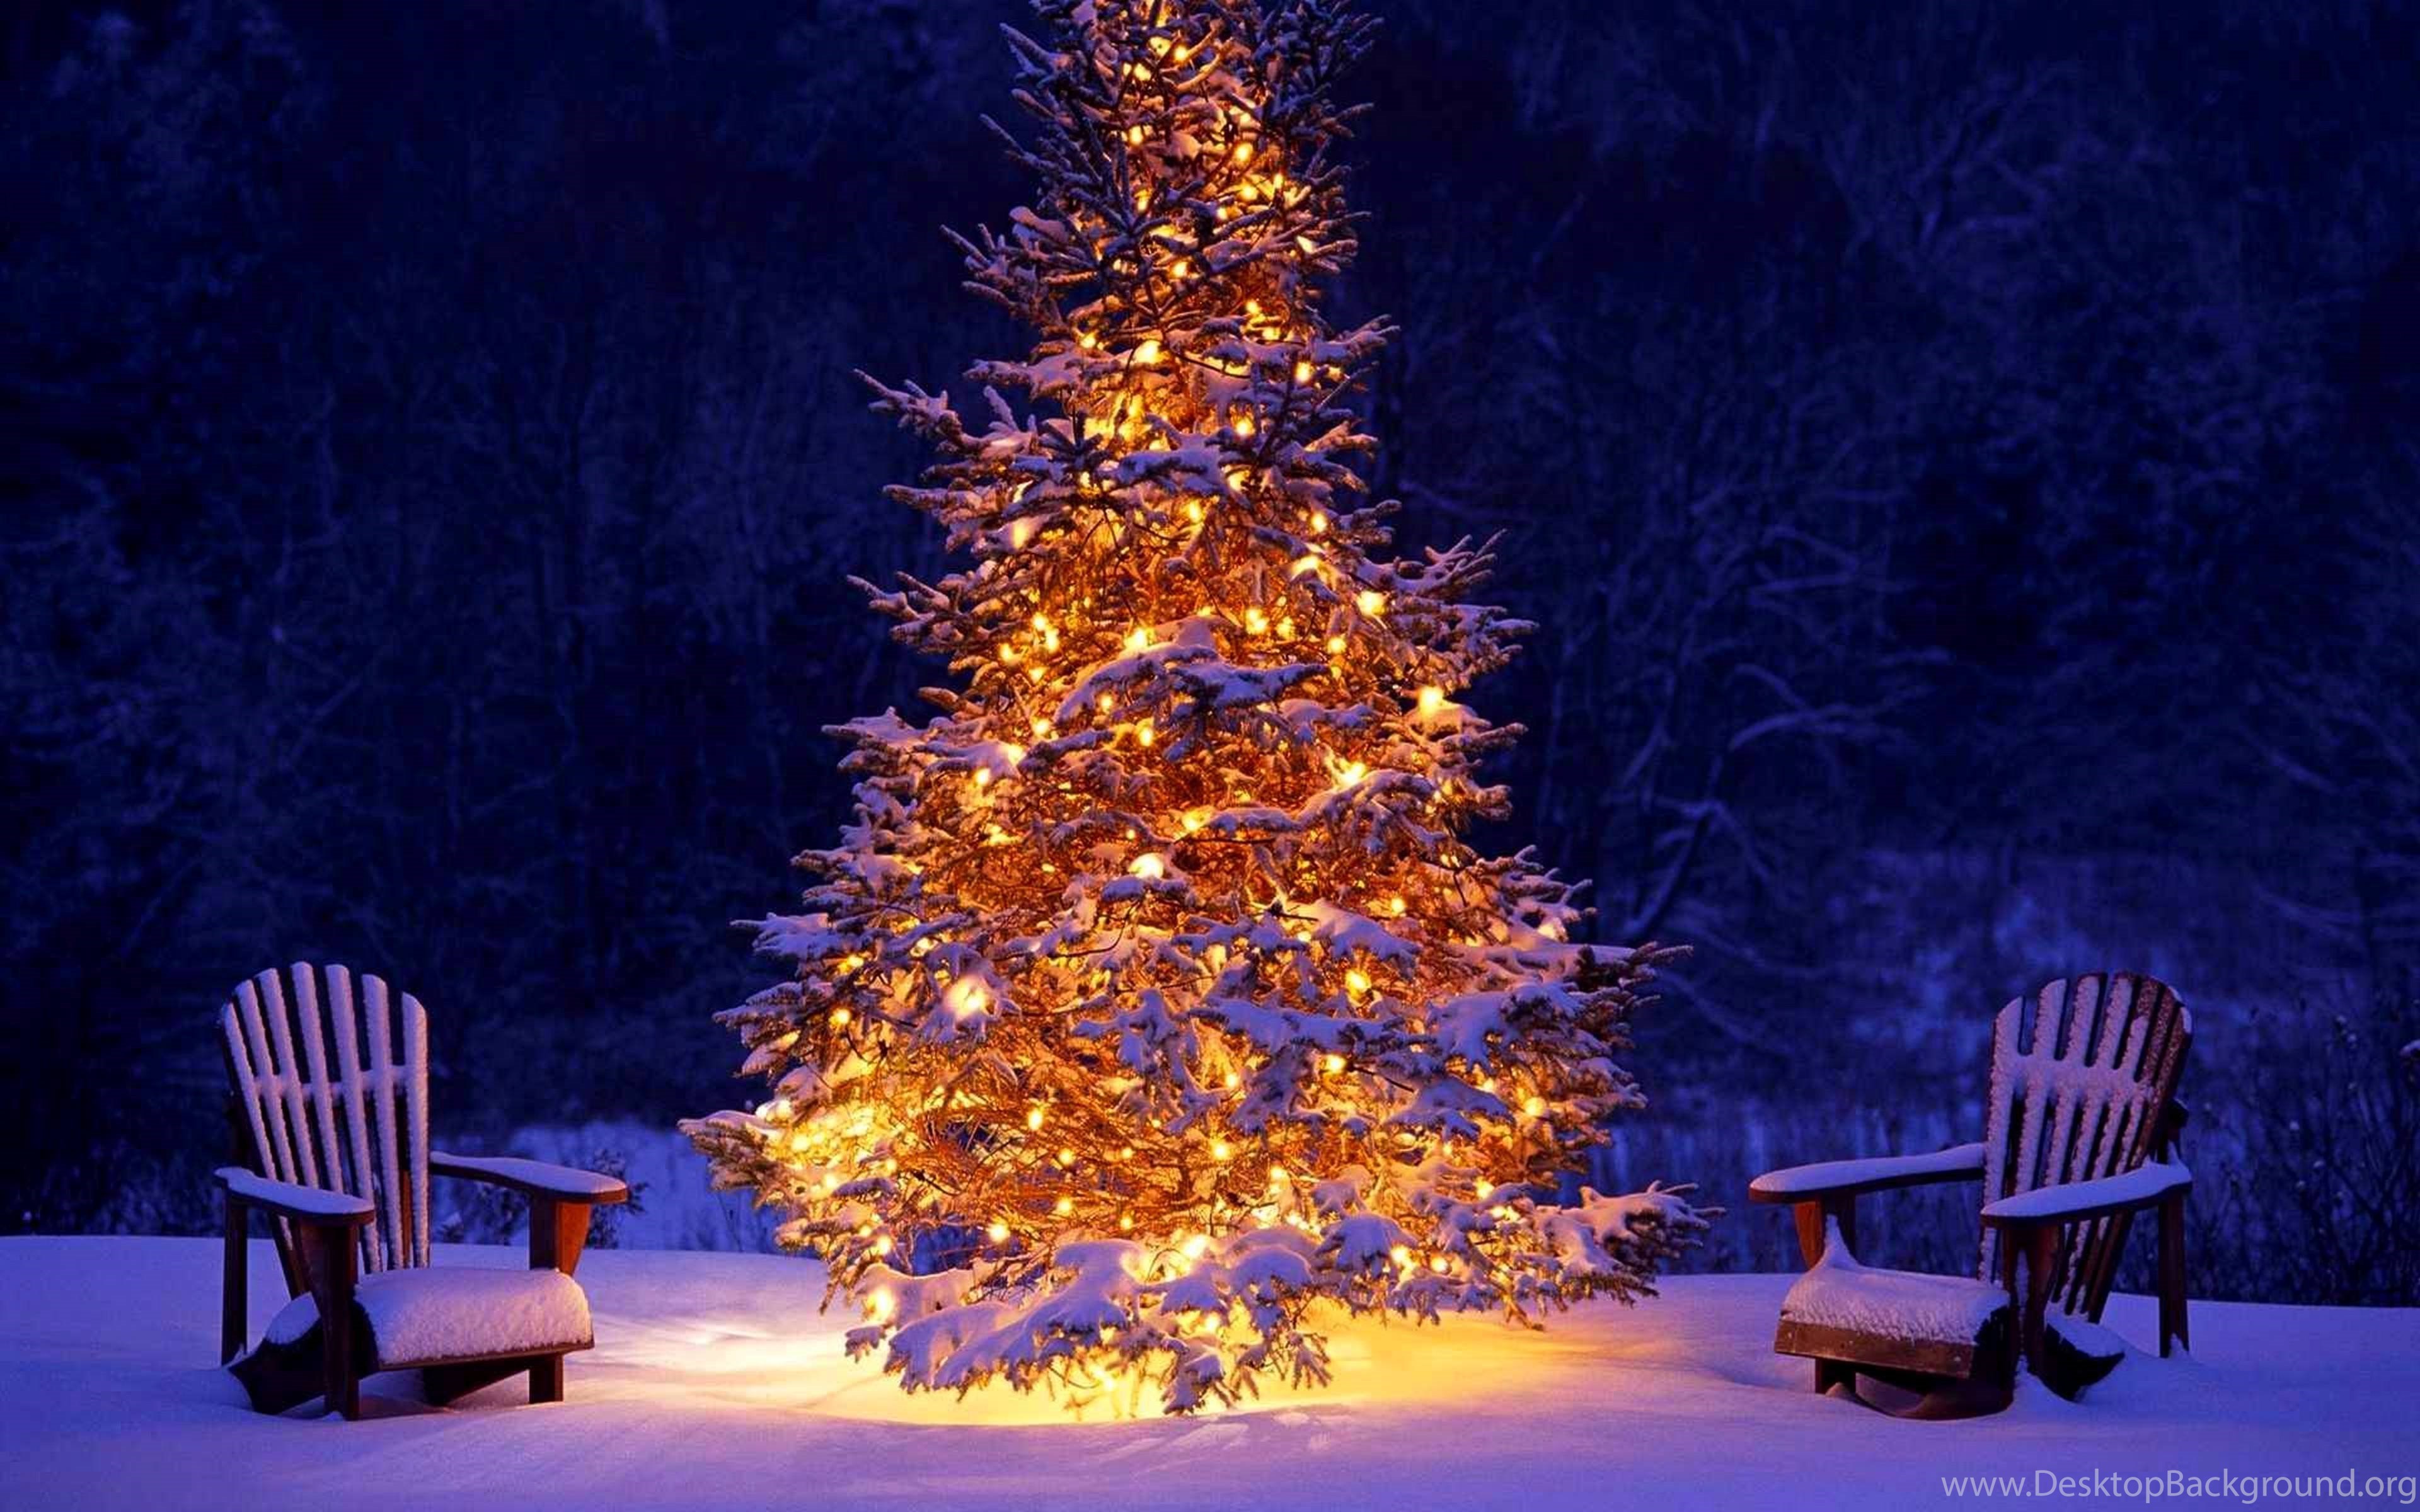 Winter Holiday Now Forest Christmas, Holidays Wallpaper Desktop Background